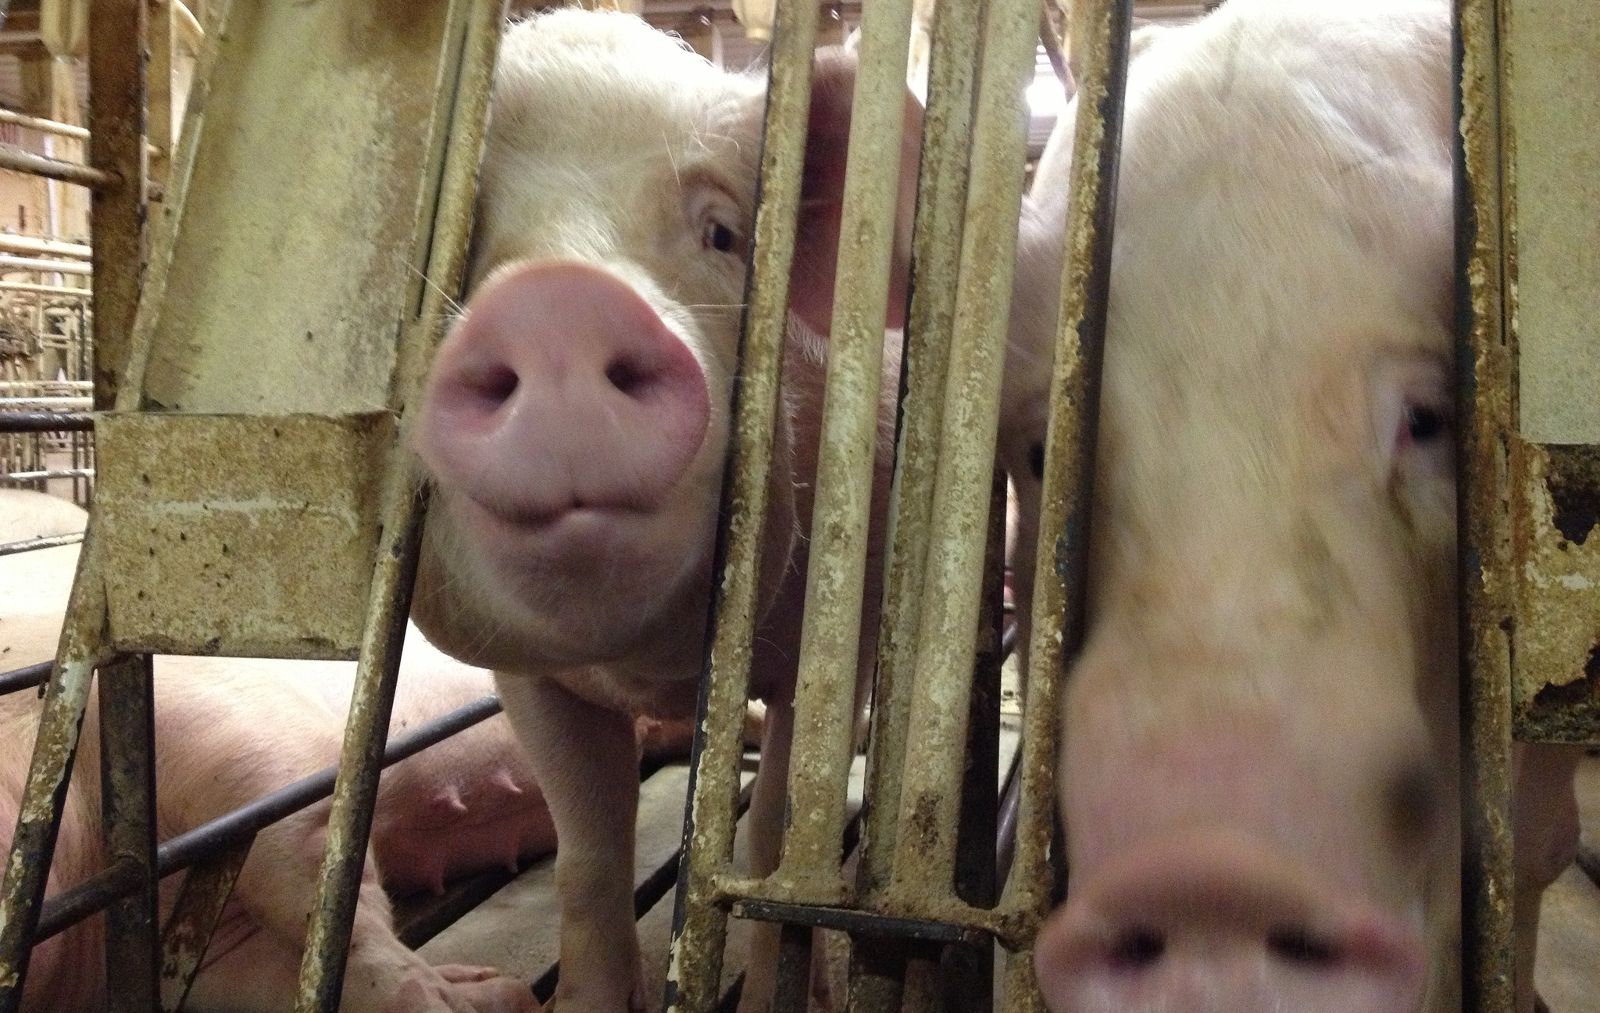 pigs in gestation crates